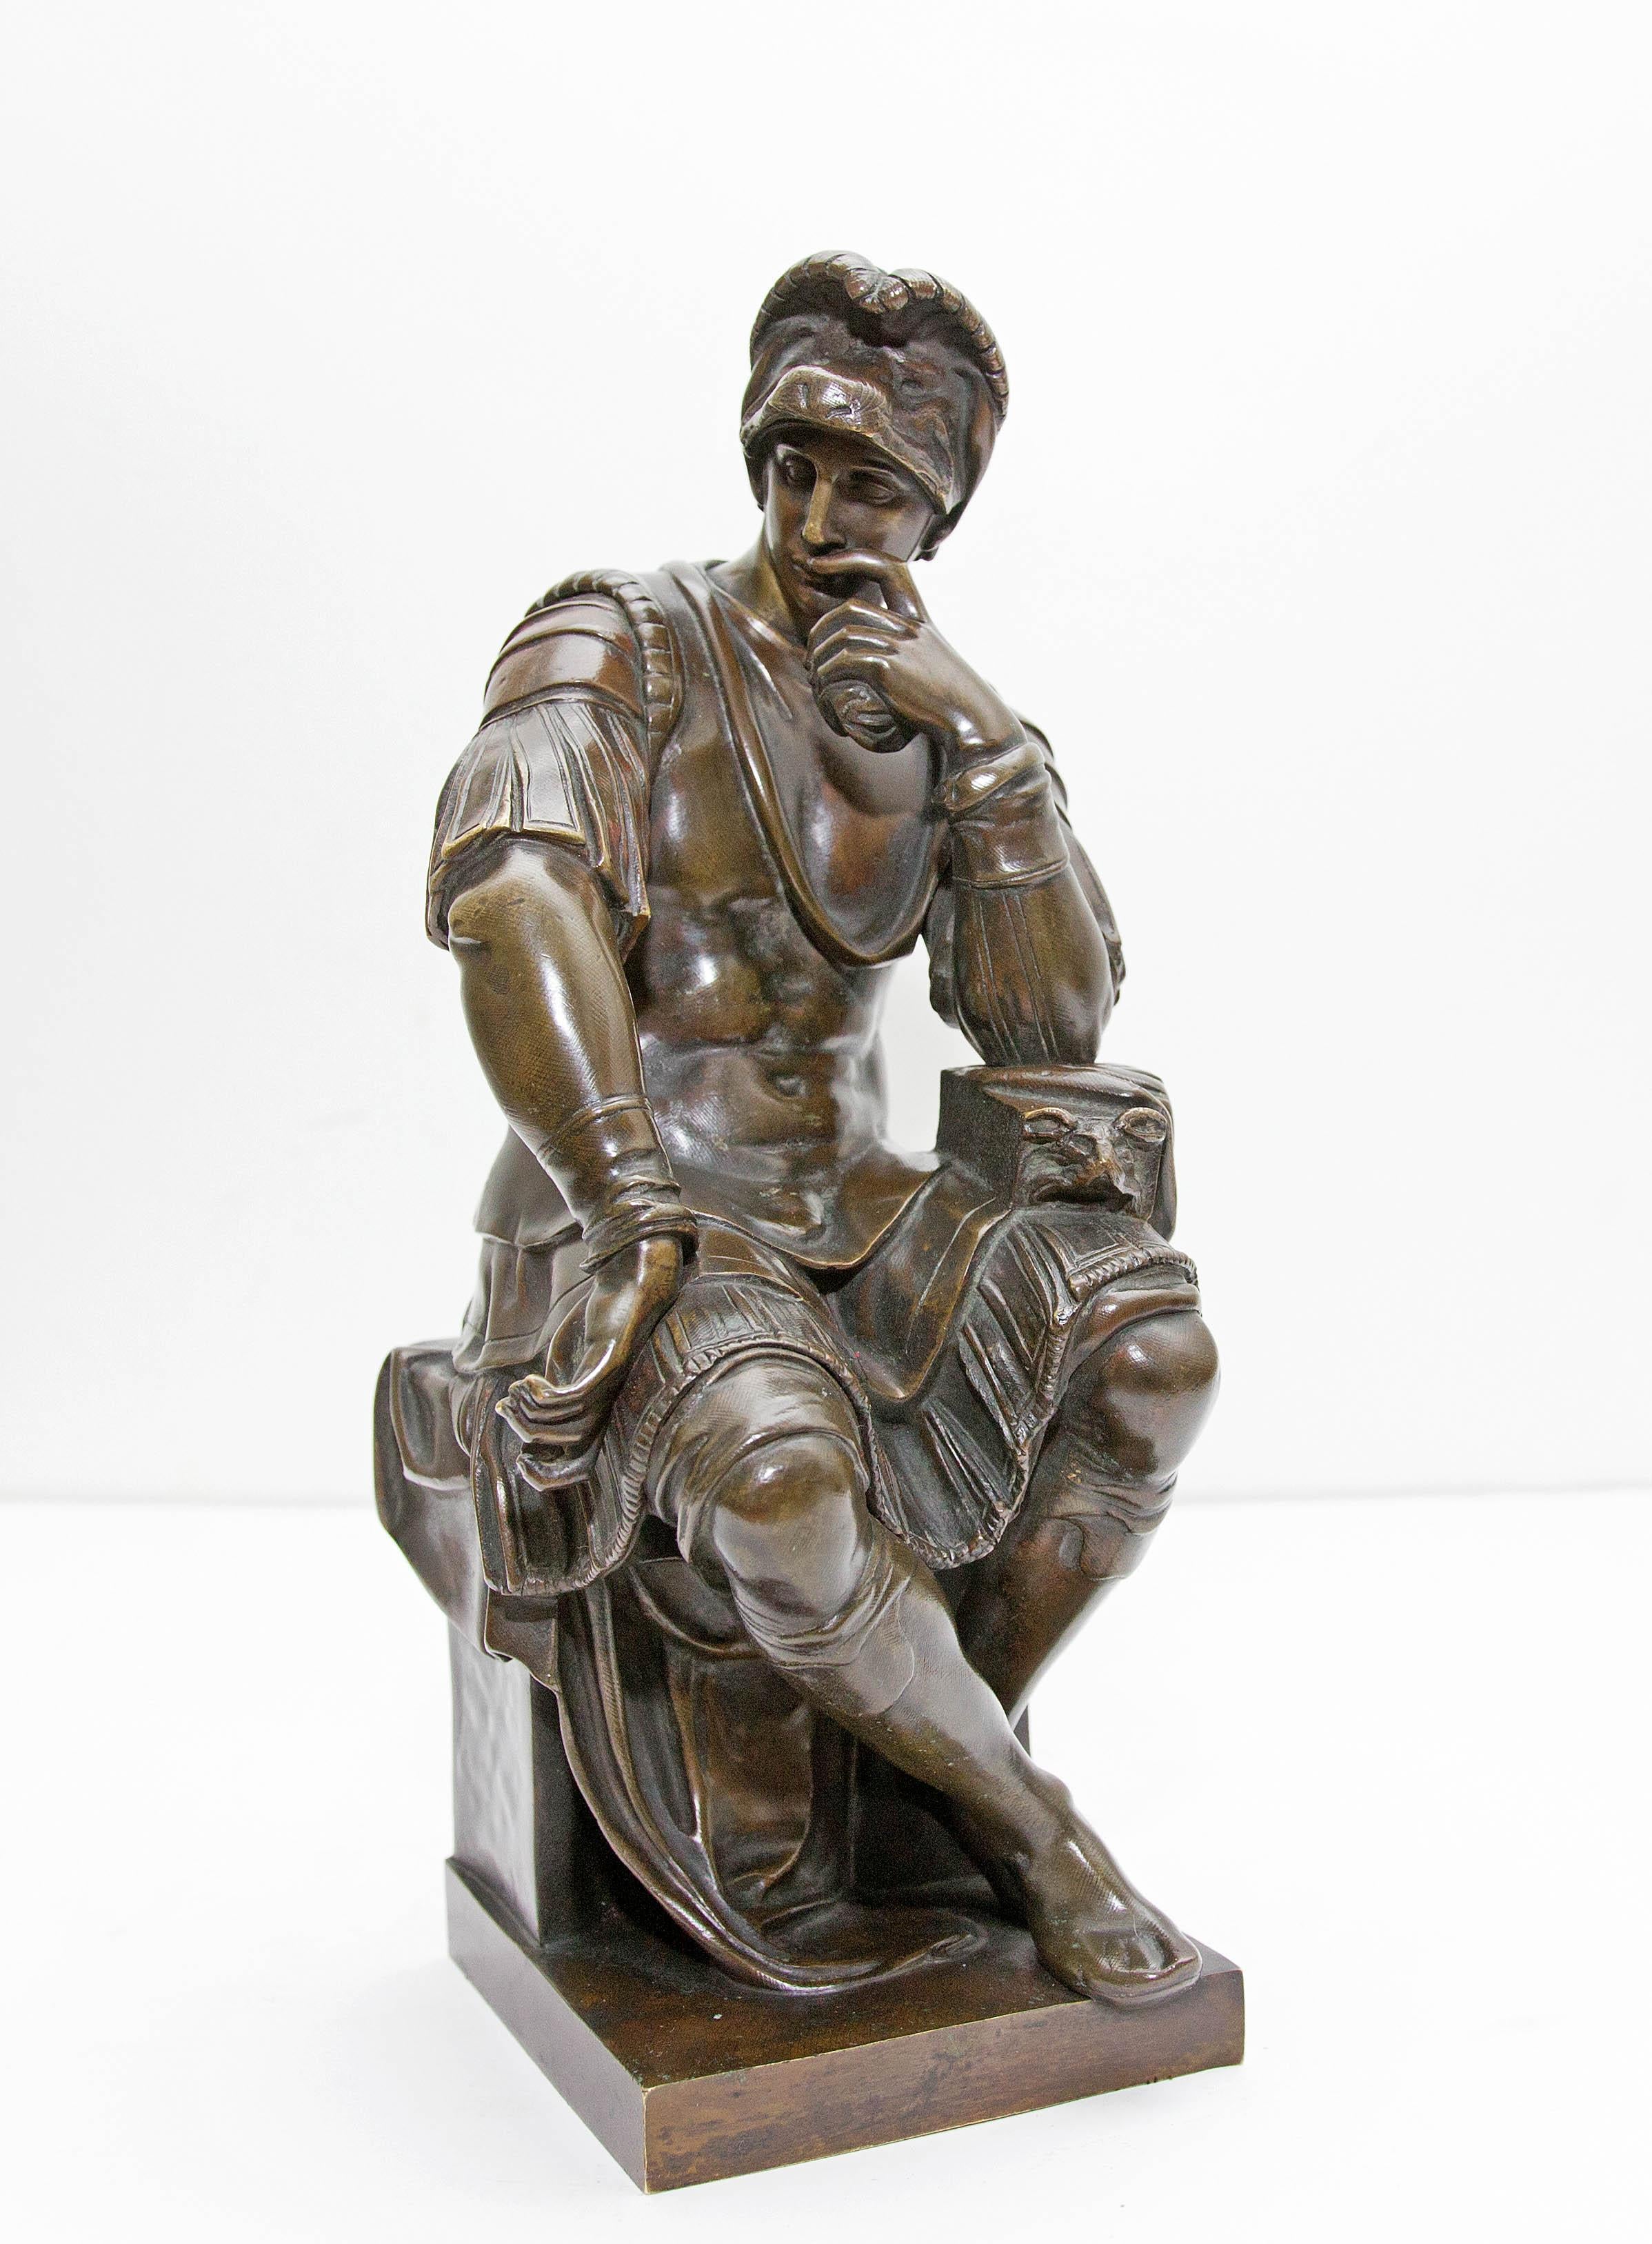 Bronze sculpture of Lorenzo de Medici after Michelangelo. Great quality with rich patina.